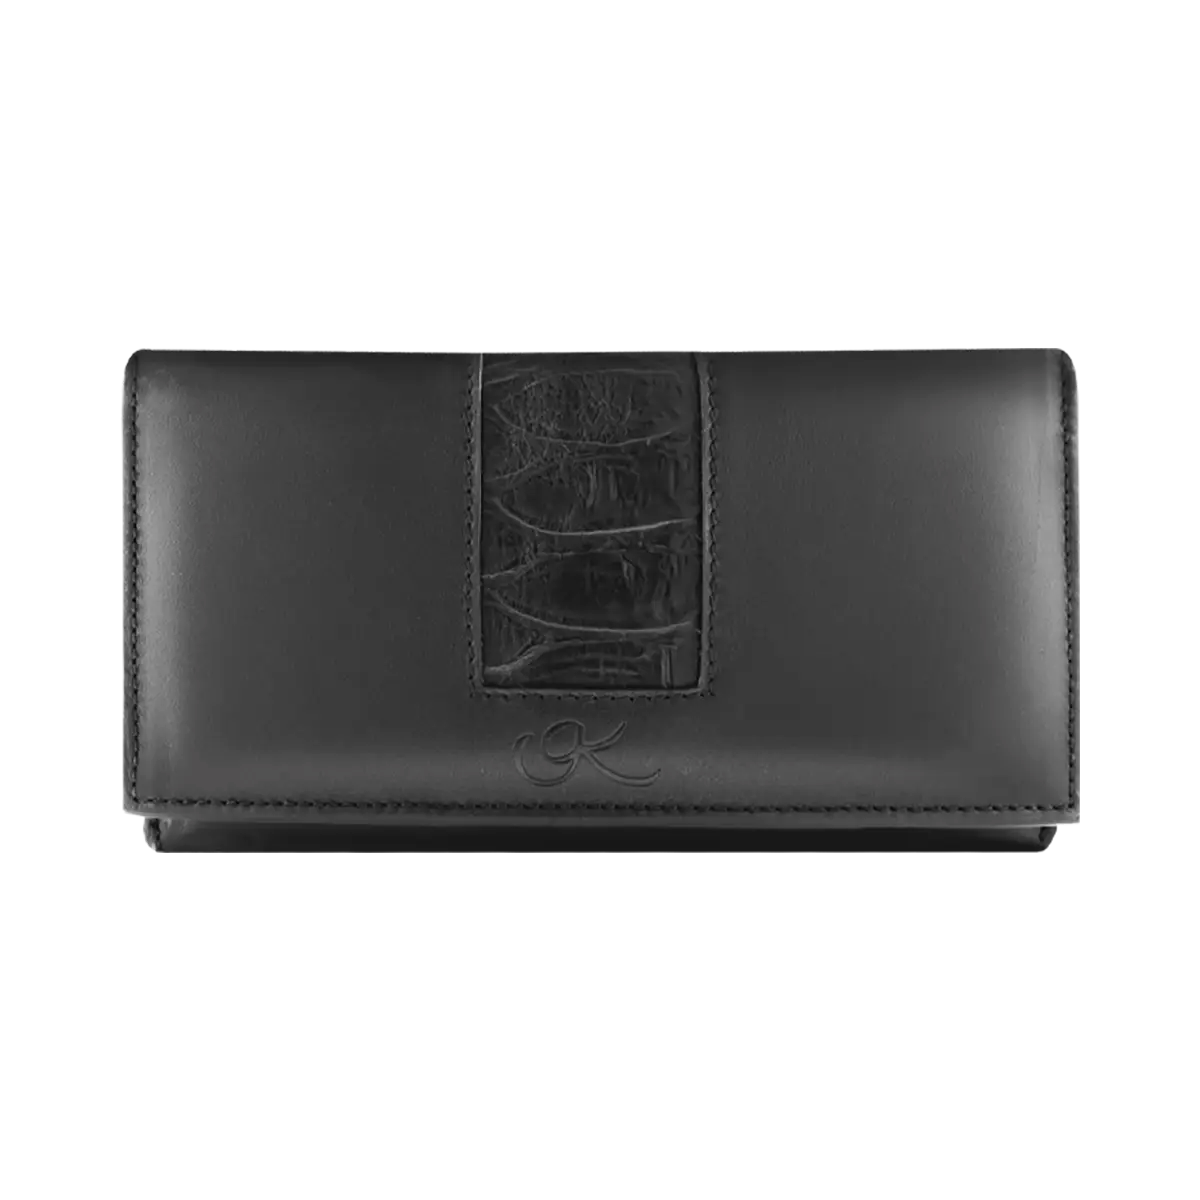 large black leather wallet for women. Fashion accessories for women, shop in San Diego, CA.